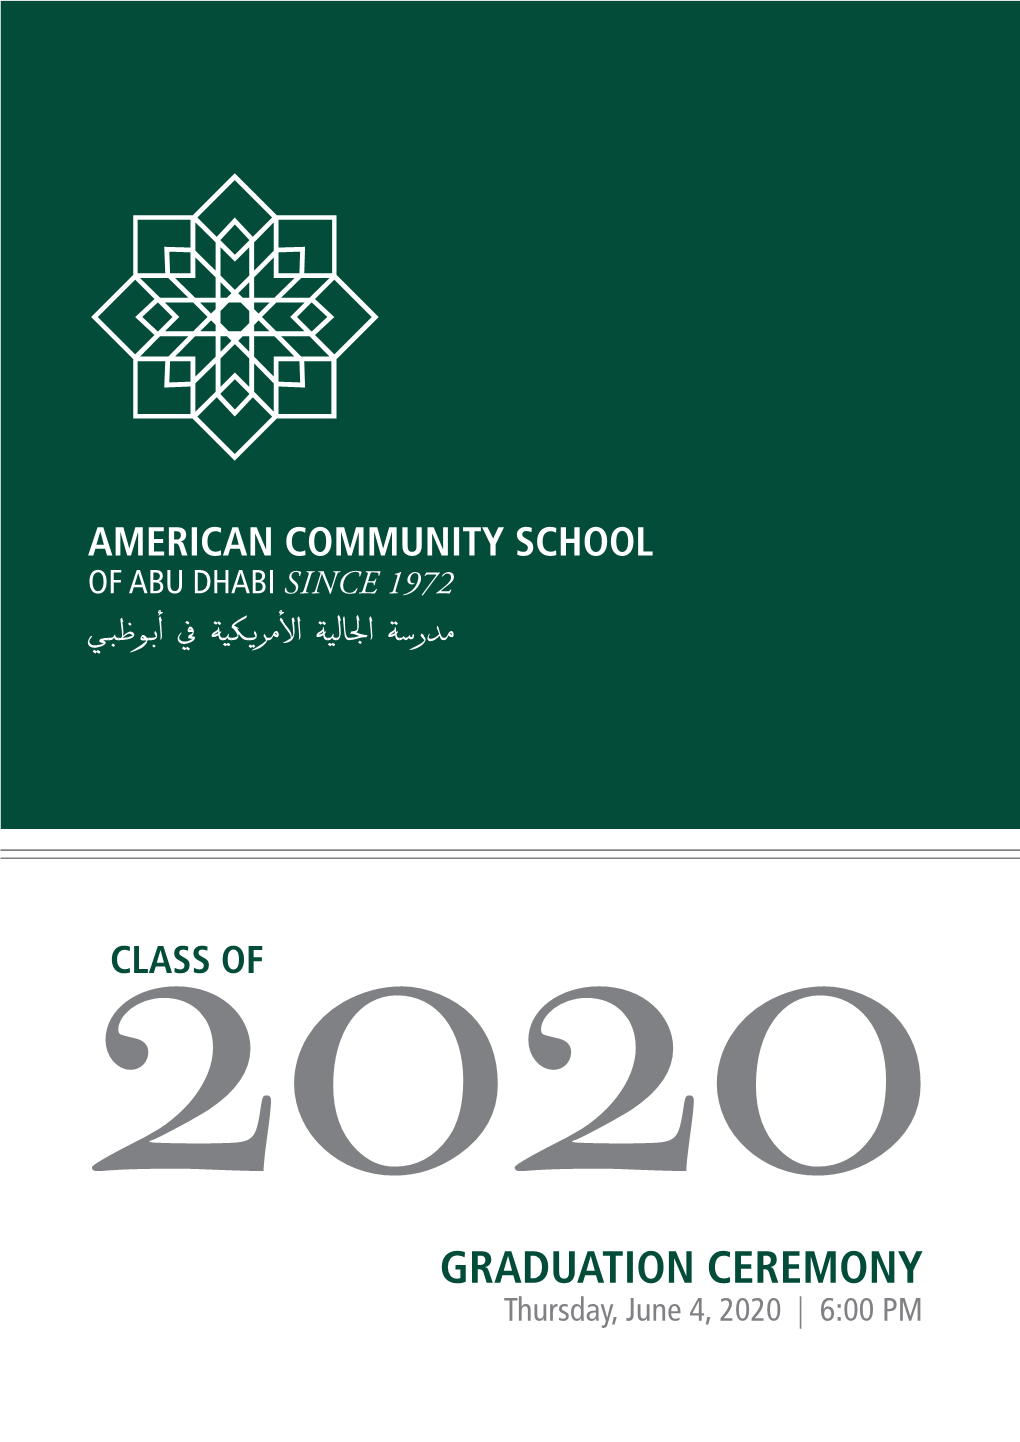 GRADUATION CEREMONY Thursday, June 4, 2020 | 6:00 PM Welcome to The